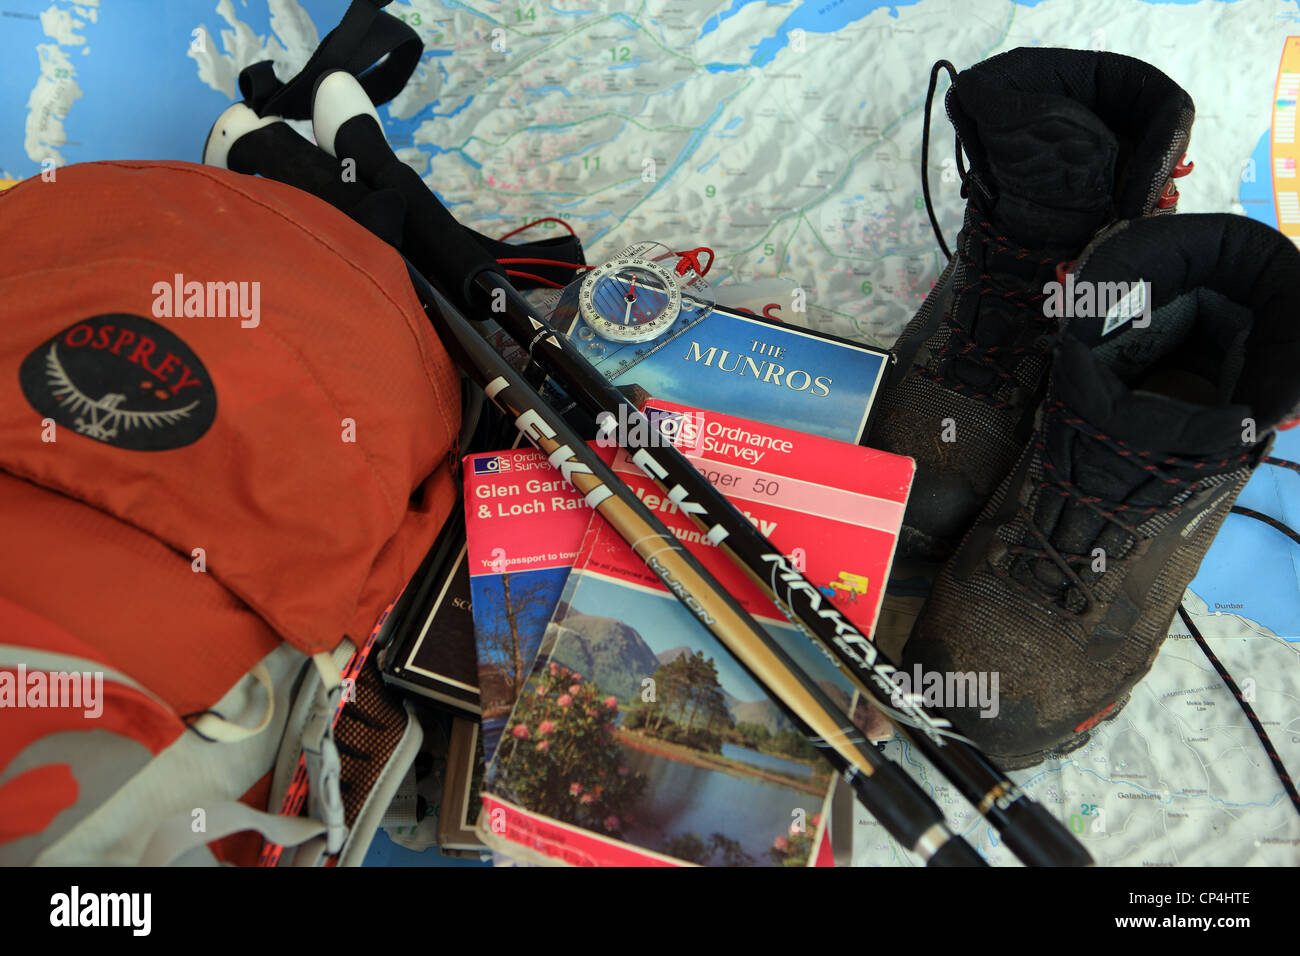 Hillwalking gear, including books, OS maps, walking poles, boots & rucksack, on a map of Scotland Stock Photo